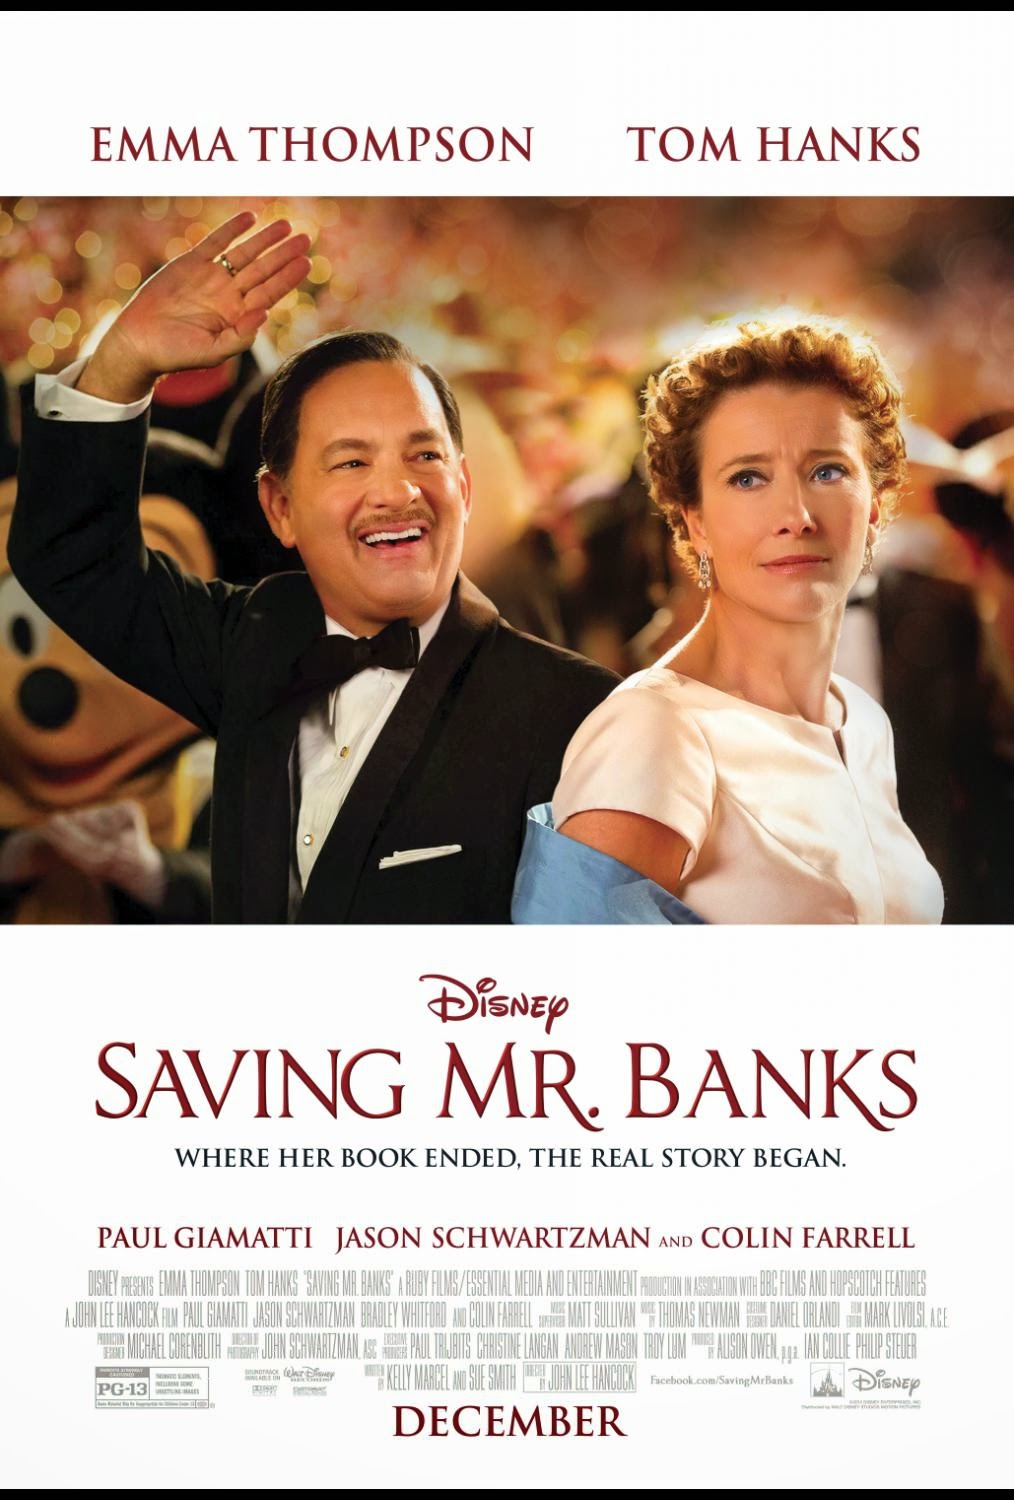 is the movie saving mr banks a true story